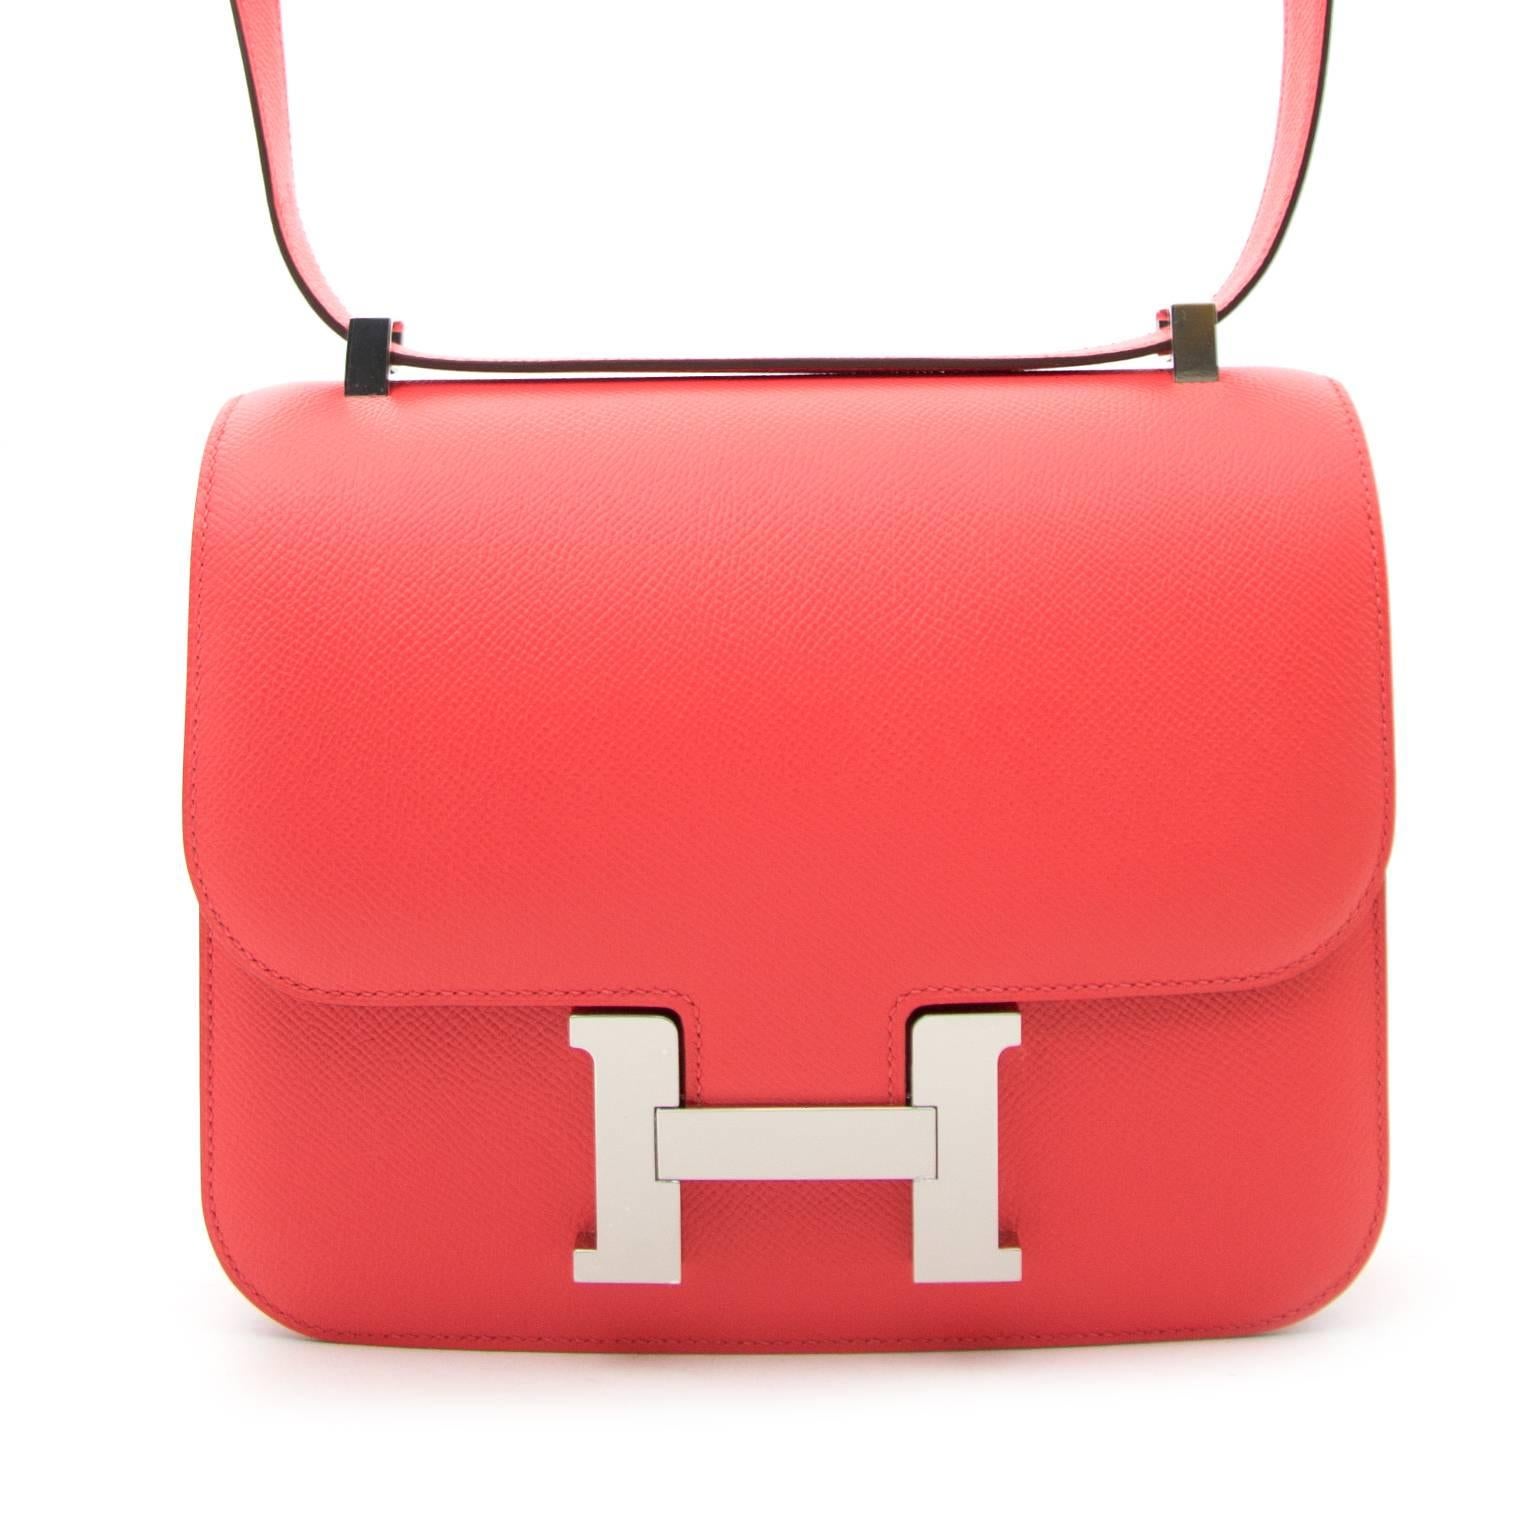 BRAND NEW Hermès Constance 24cm Epsom Rose Jaipur

This store fresh bag is finely crafted from epsom calfskin leather in a bright coral pink with palladium silver hardware including a H buckle at the front.

This item makes your outfit fresh and